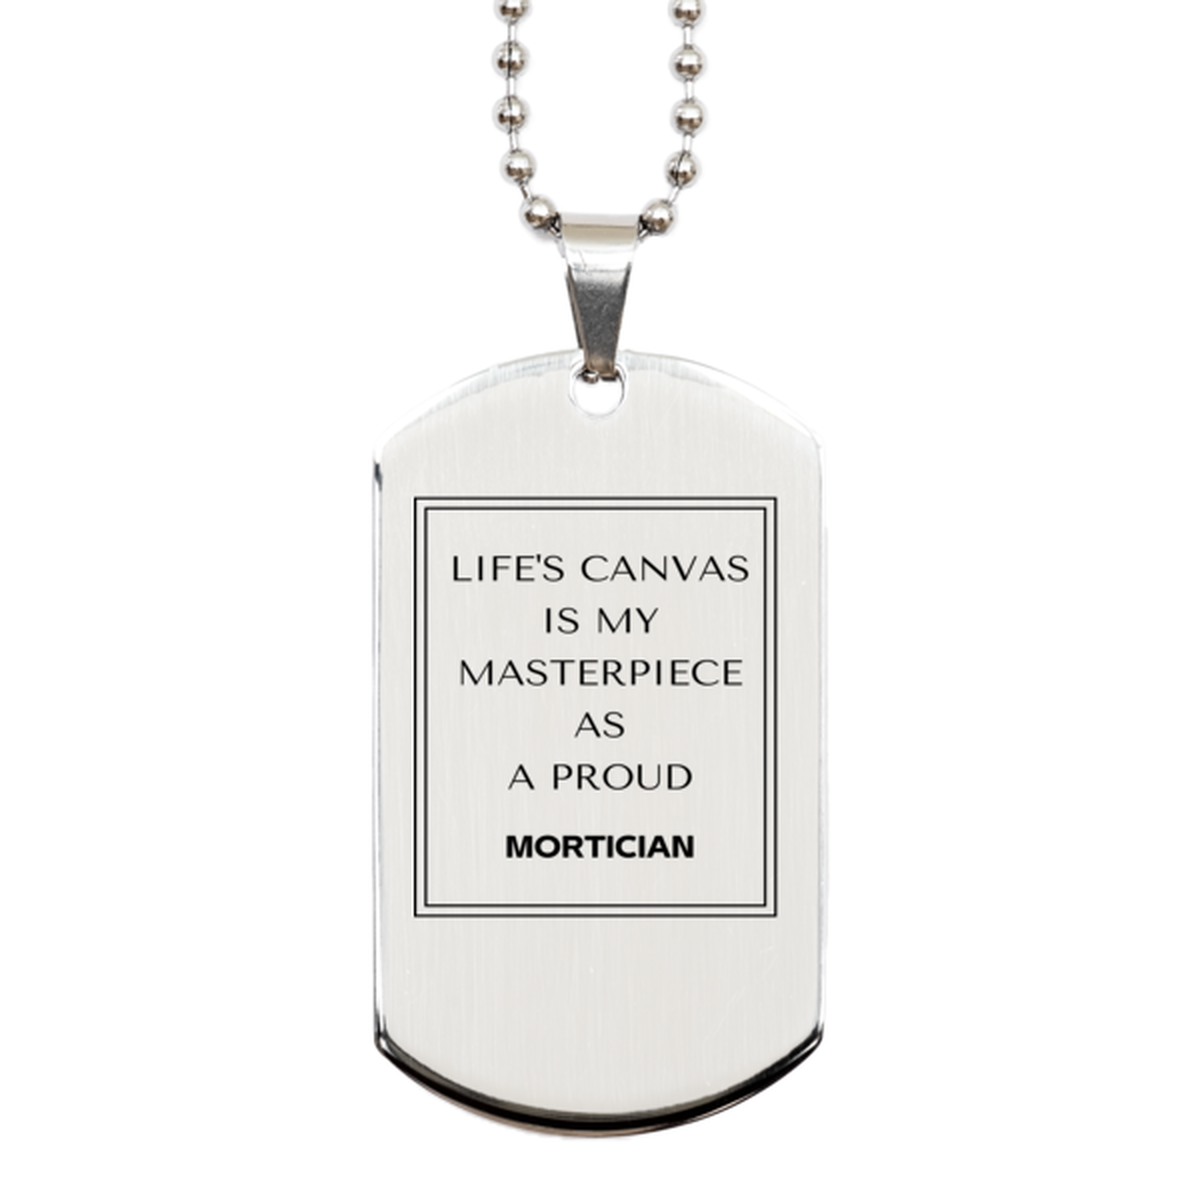 Proud Mortician Gifts, Life's canvas is my masterpiece, Epic Birthday Christmas Unique Silver Dog Tag For Mortician, Coworkers, Men, Women, Friends